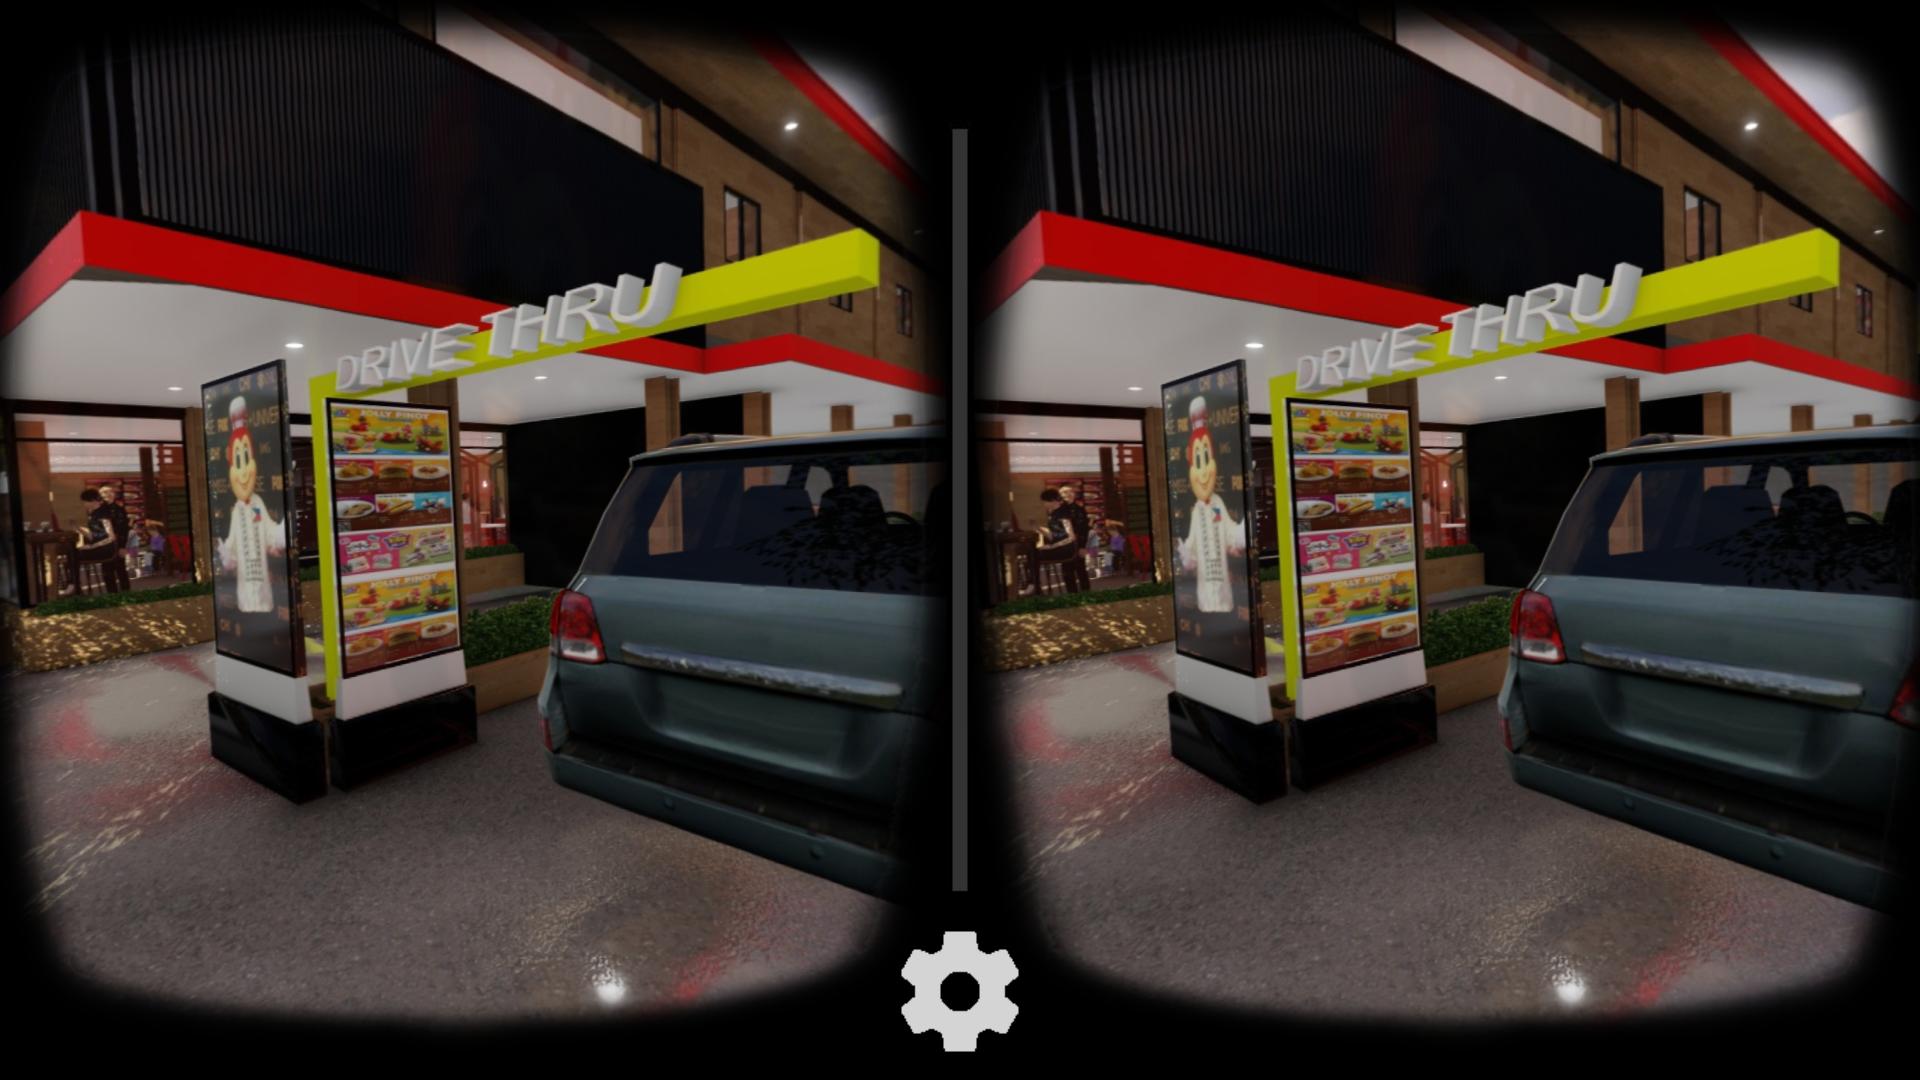 Jollibee Vr For Android Apk Download